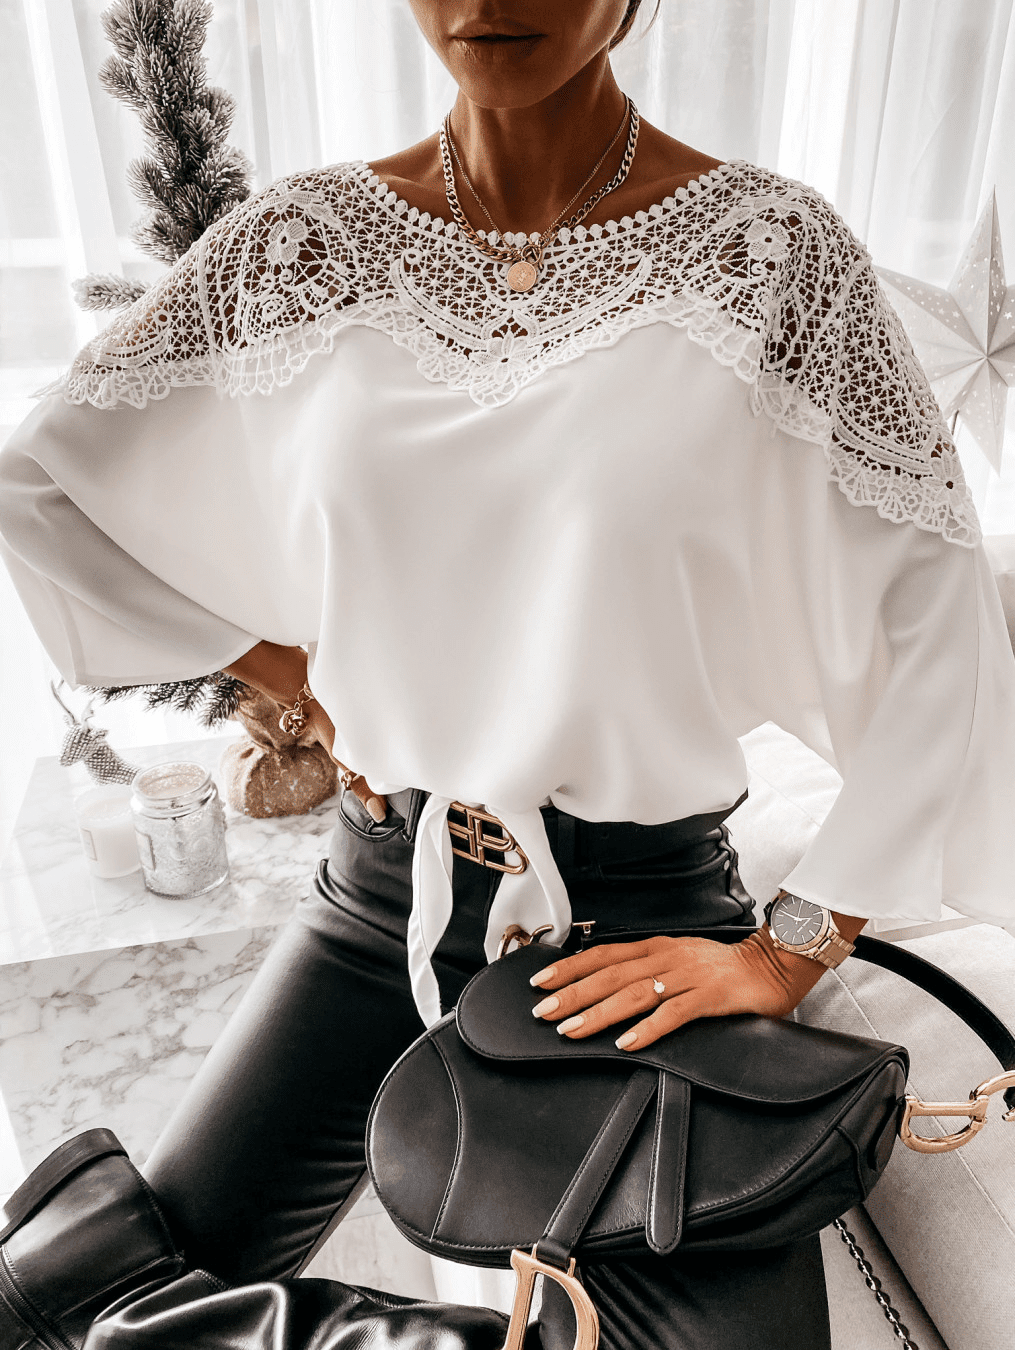 Vintage crochet embroidery lace stitching white blouse shirt